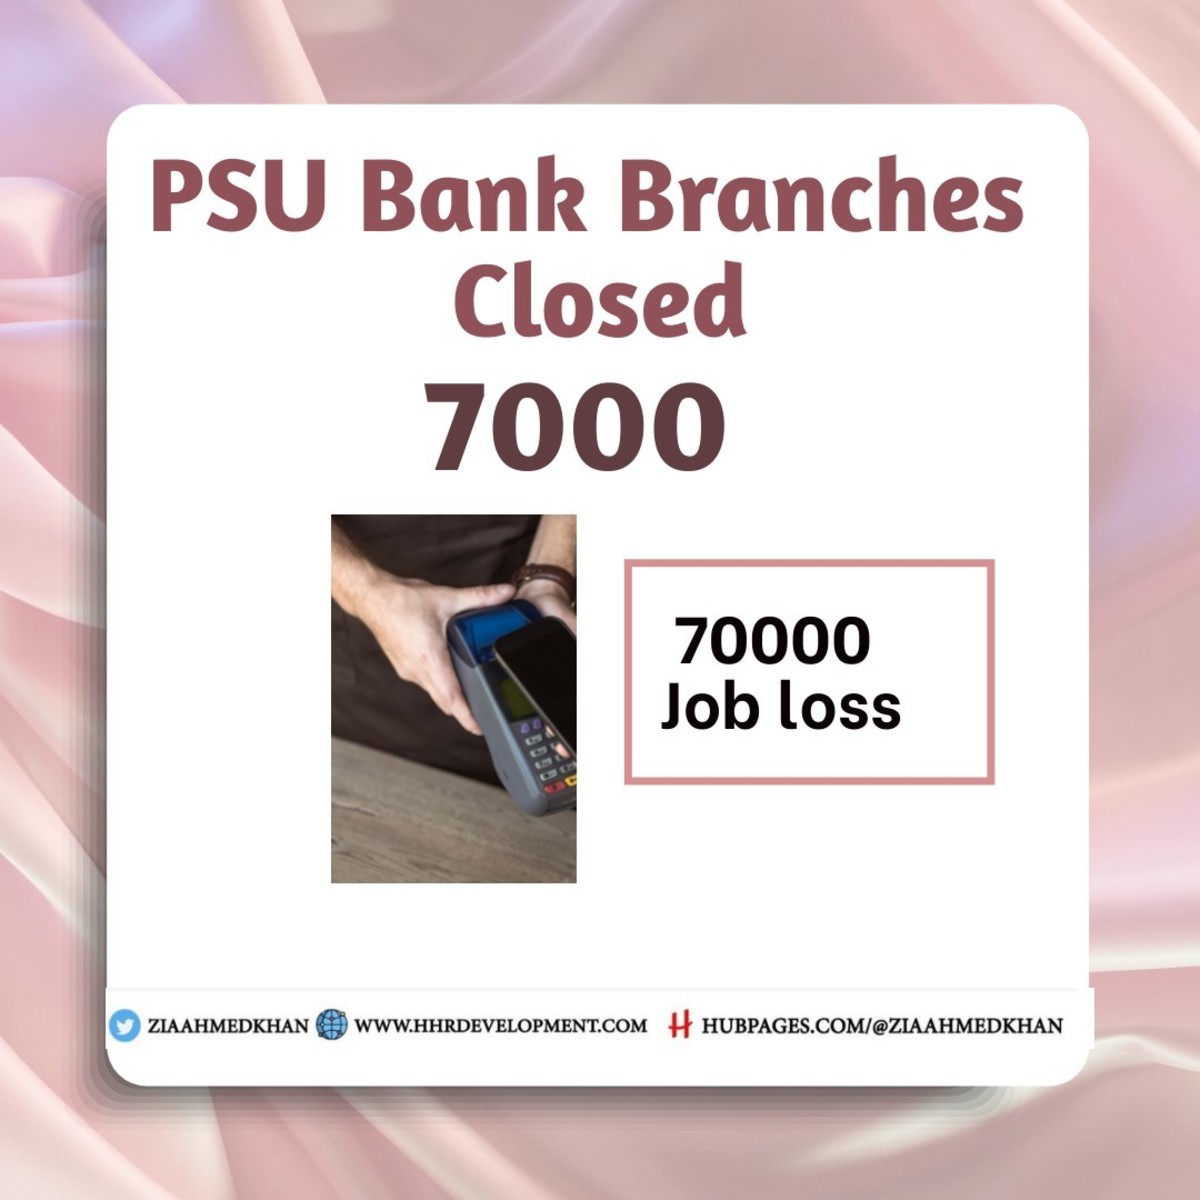 Number of Bank Branches Closed 